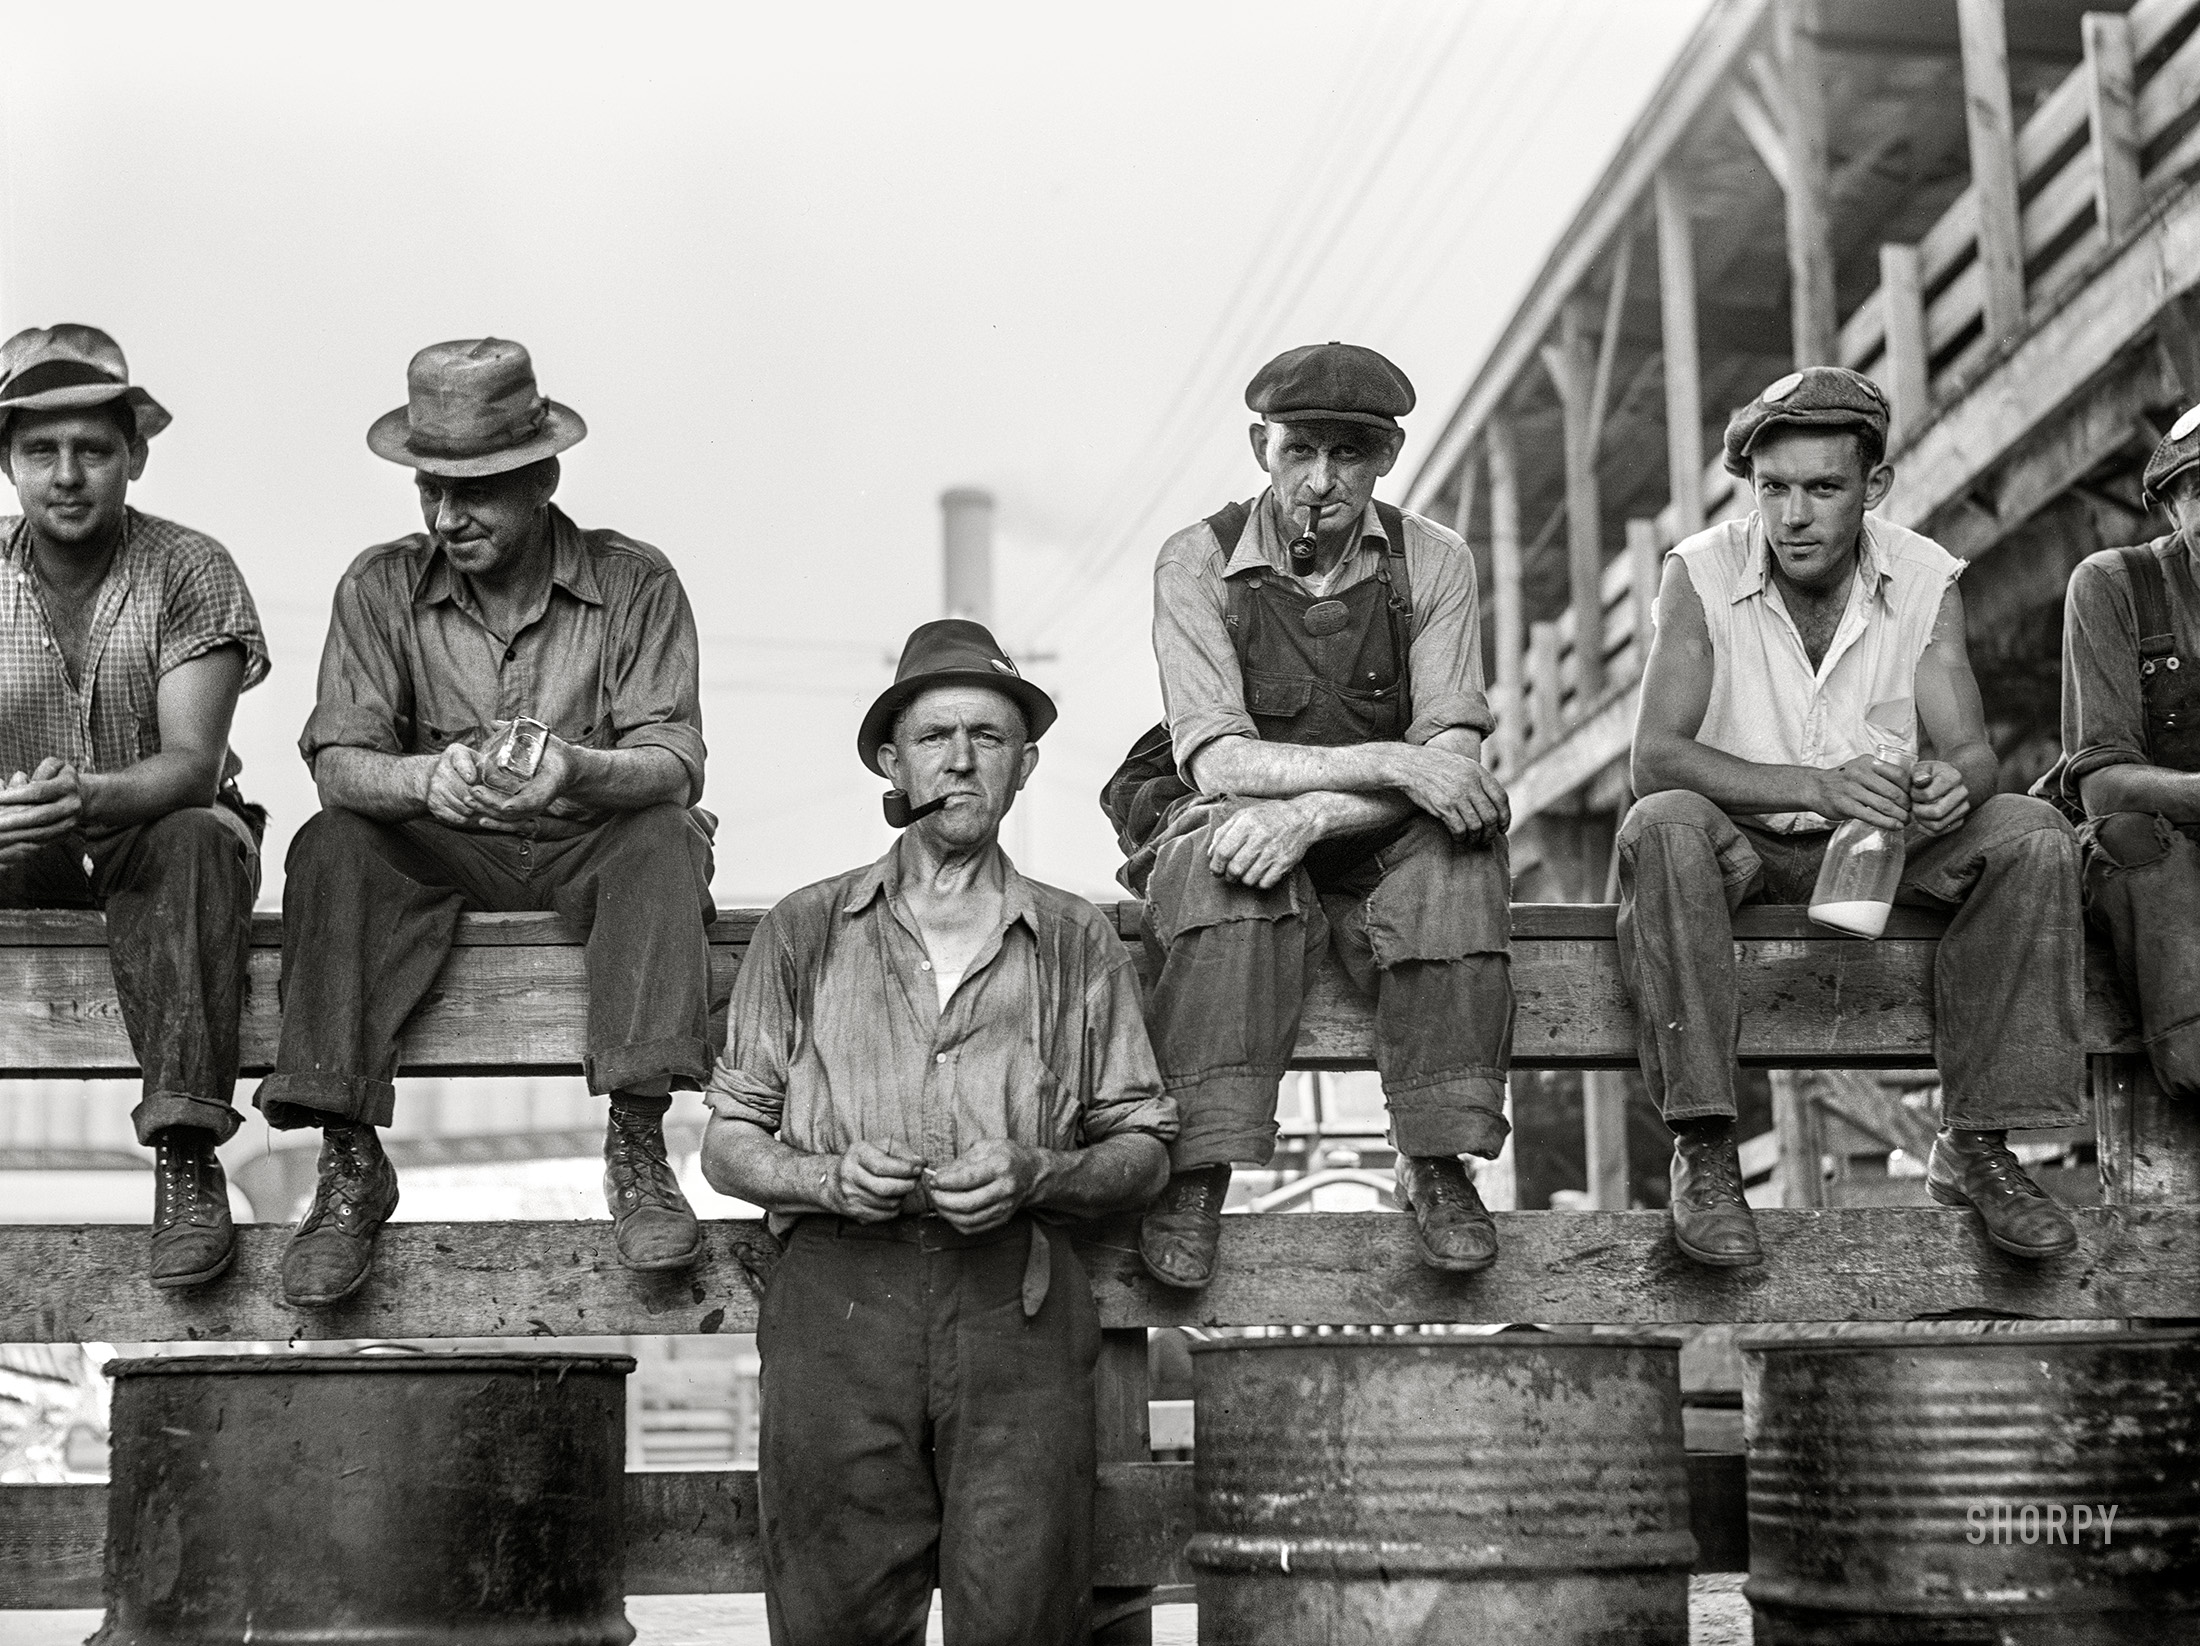 July 1941. "Stockyard workers during lunch hour. Chicago, Illinois." Medium format acetate negative by John Vachon for the Farm Security Administration. View full size.